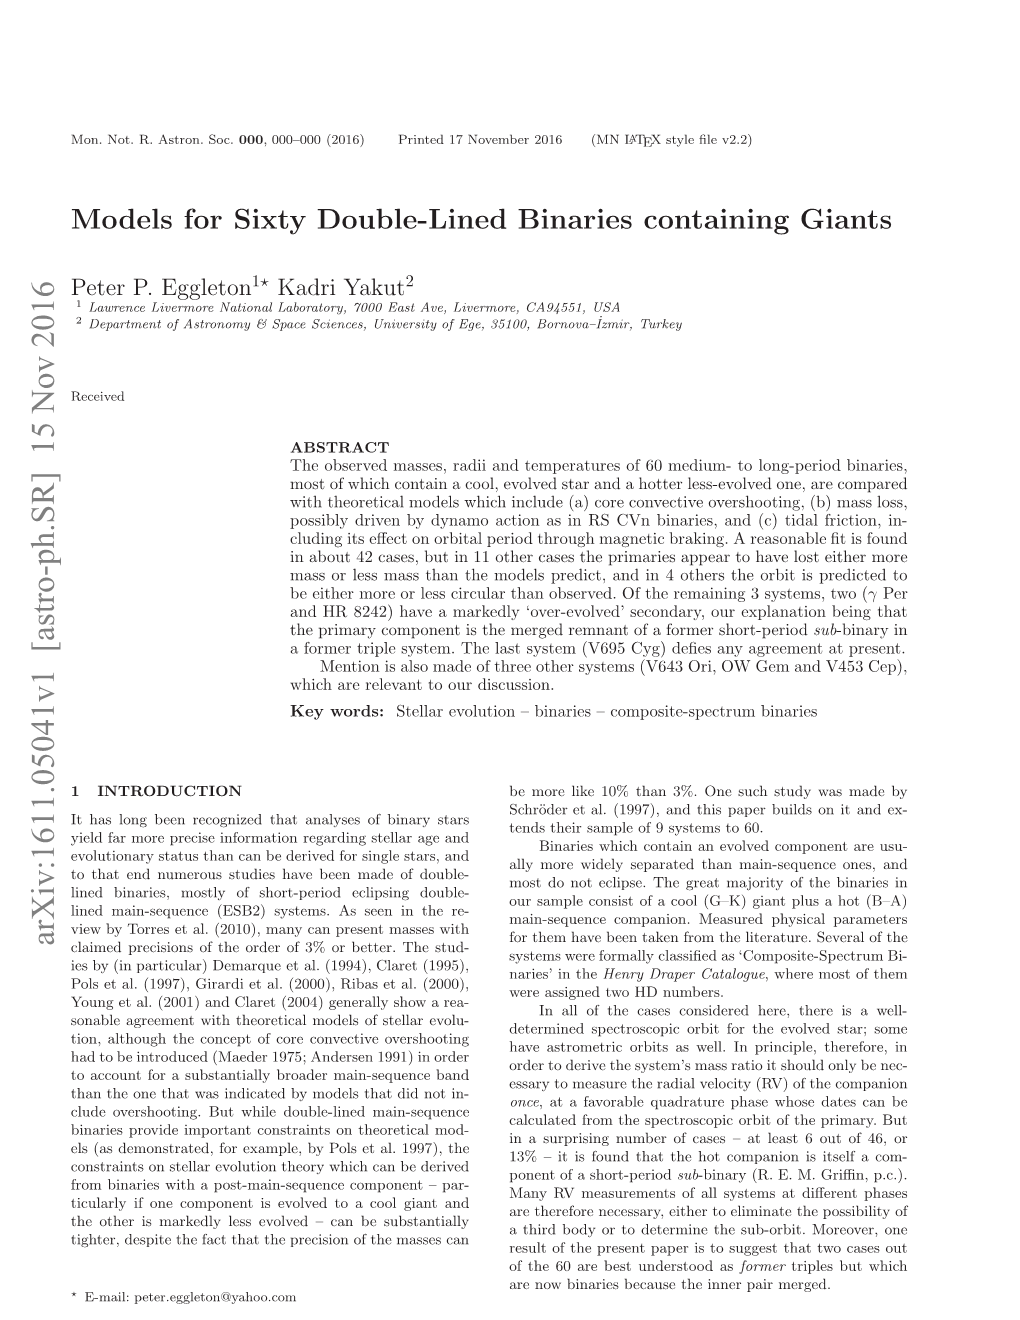 Models for Sixty Double-Lined Binaries Containing Giants